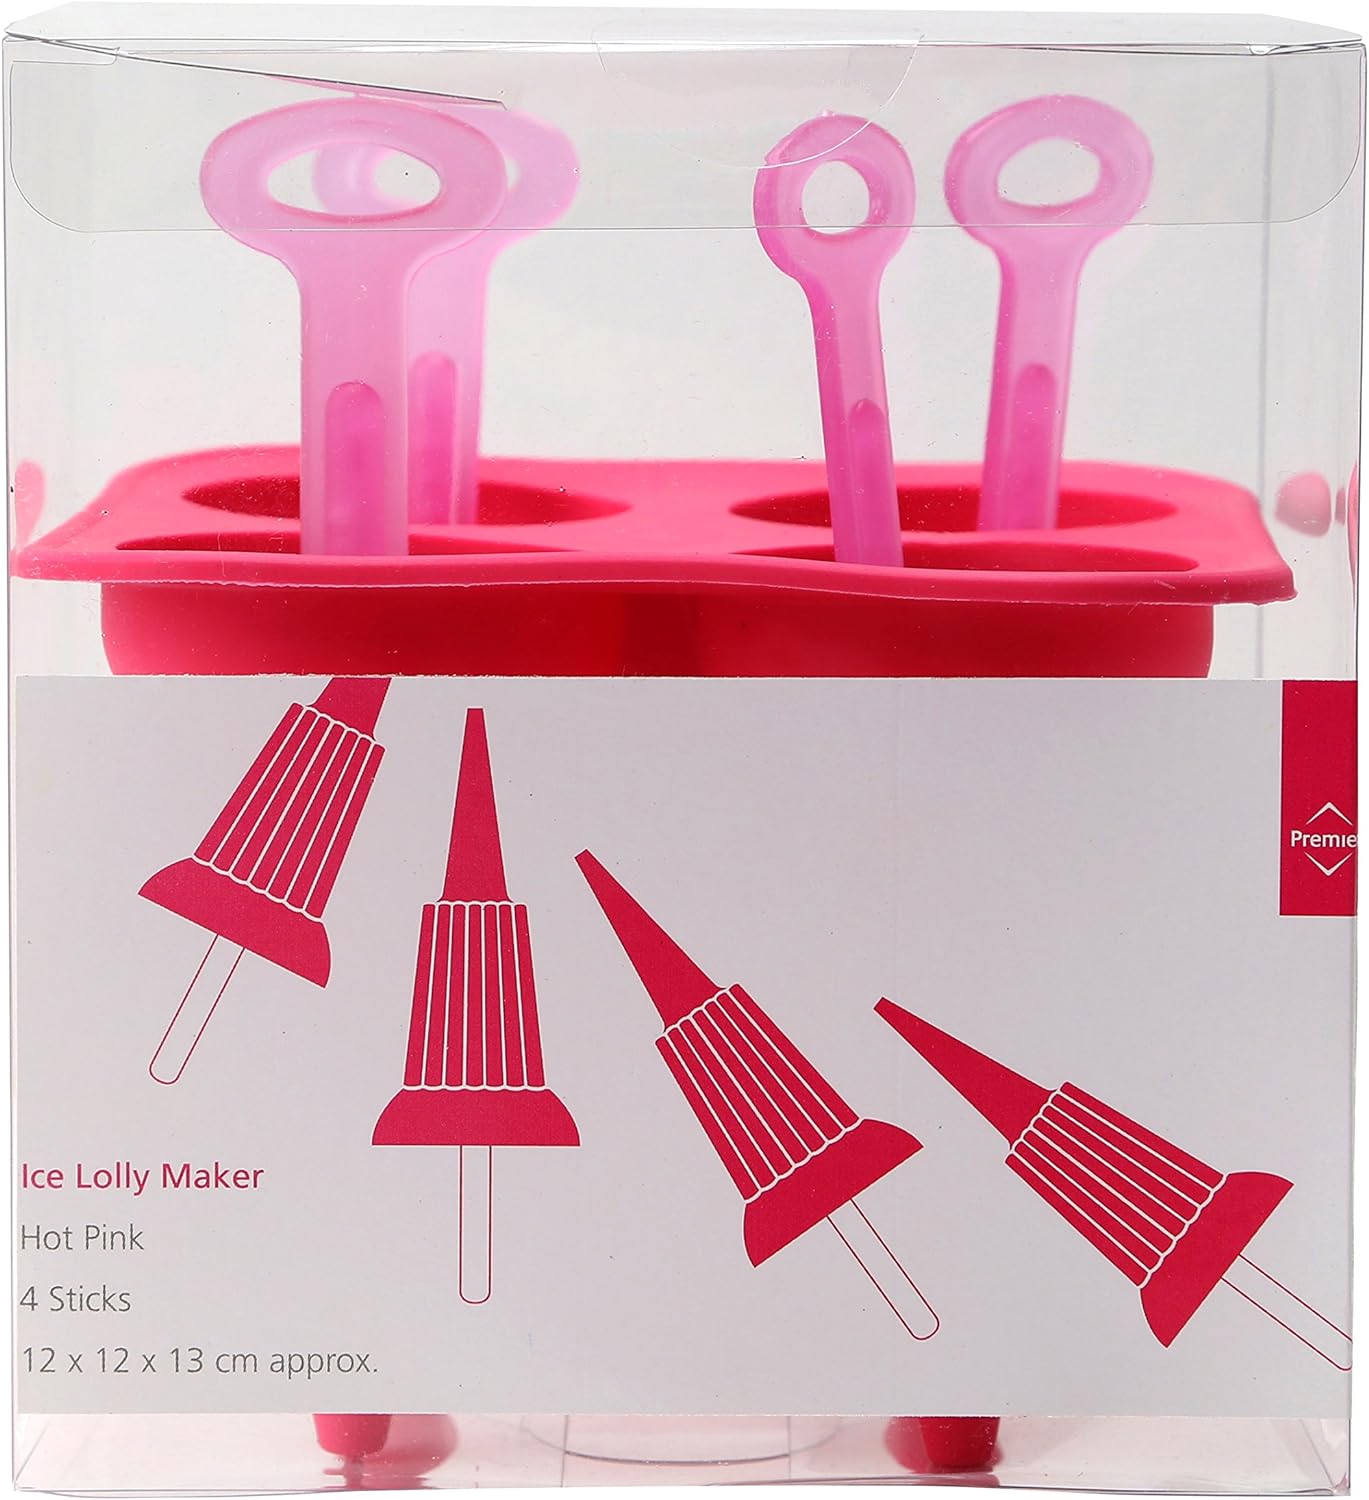 Premier Hot Pink 4 Ice Lolly Maker Kitchen Accessories